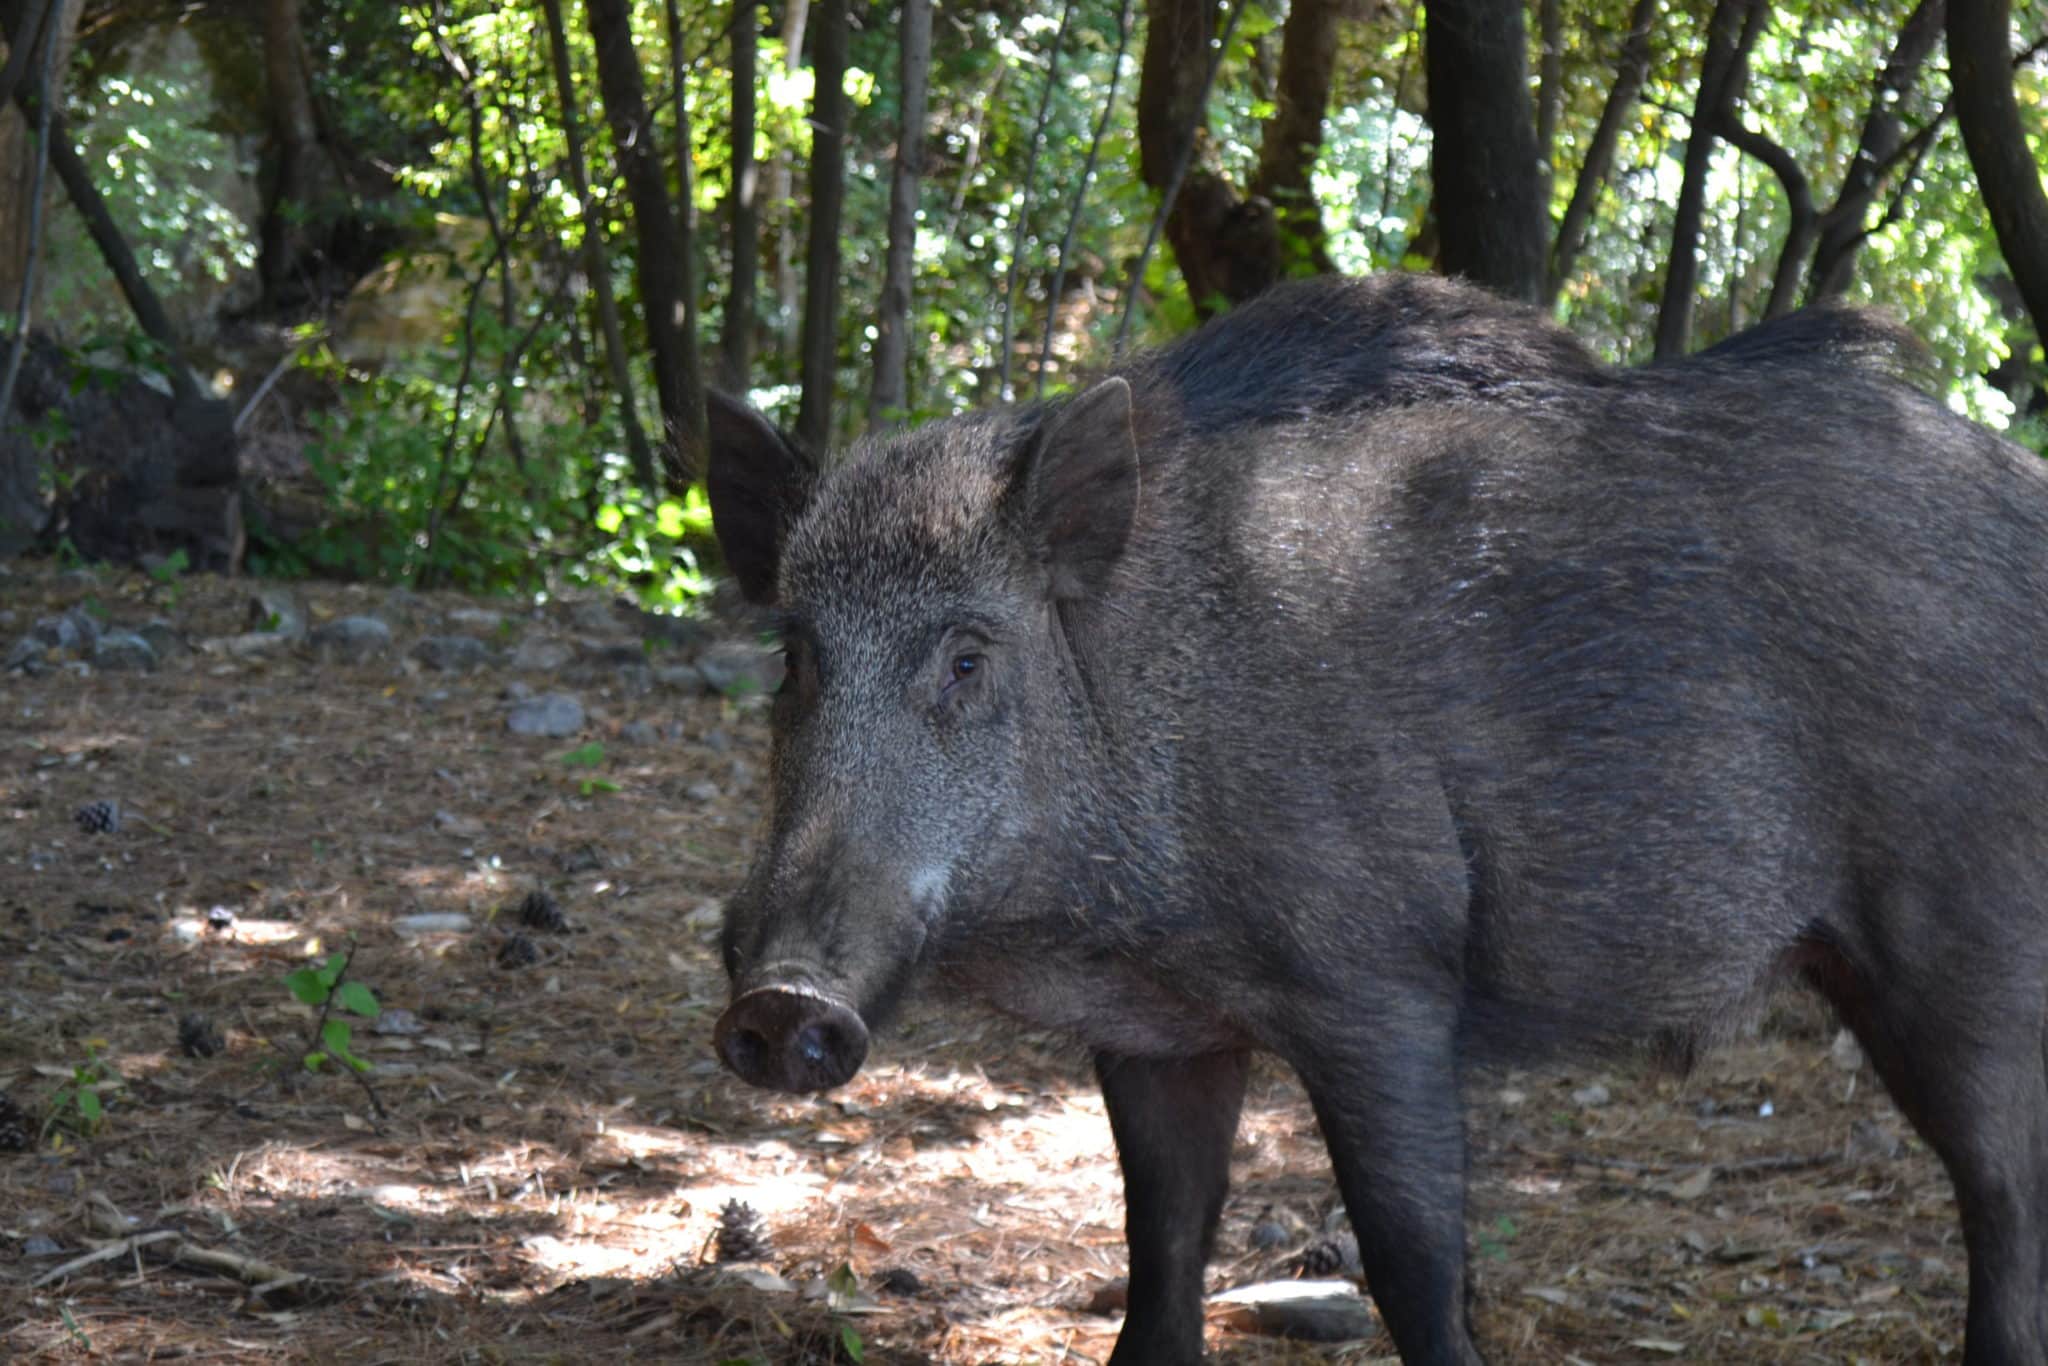 A wild boar in the forest